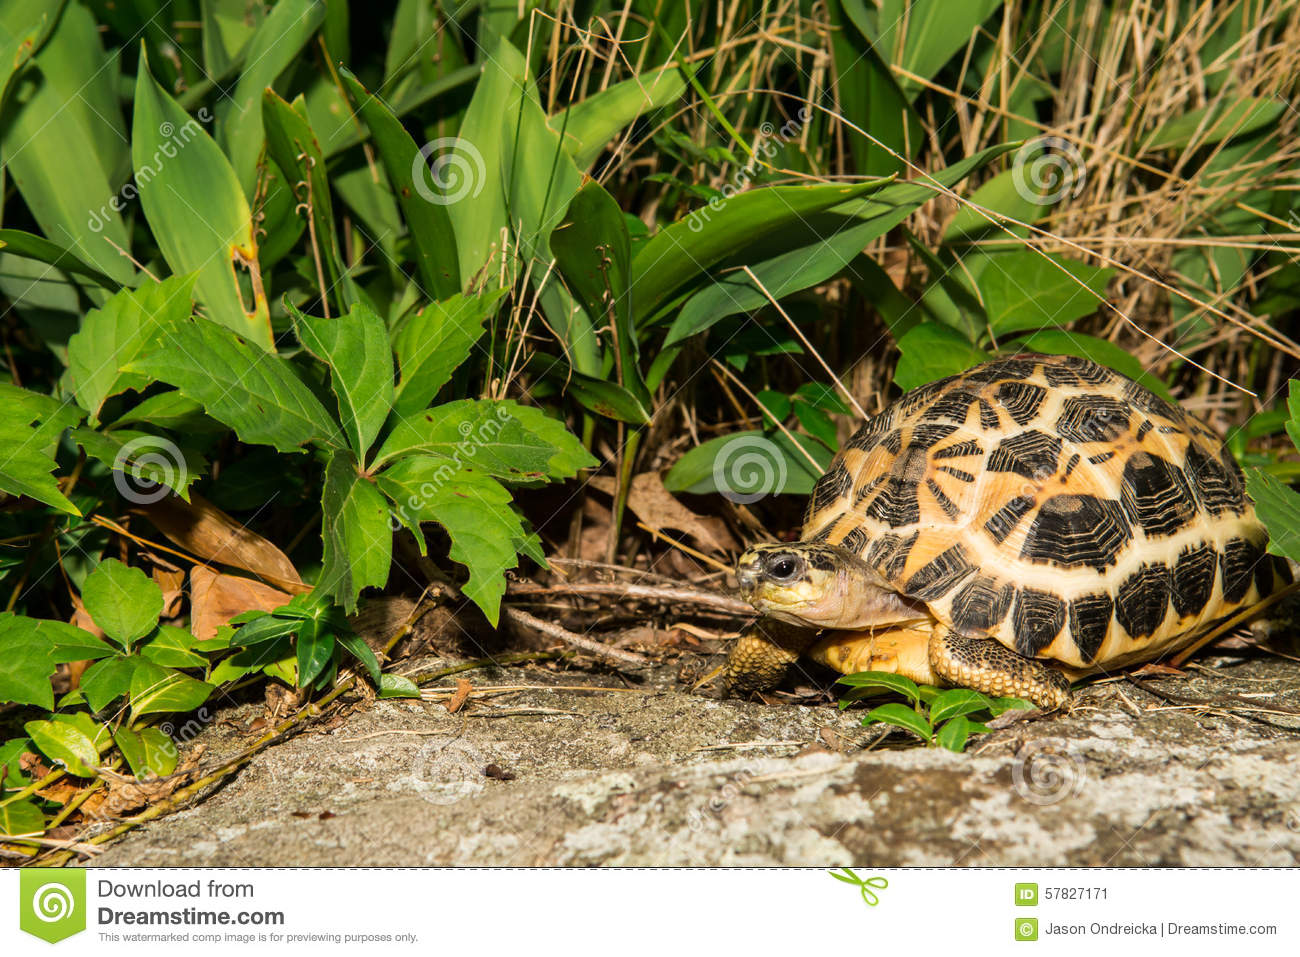 Spider Tortoise clipart #13, Download drawings